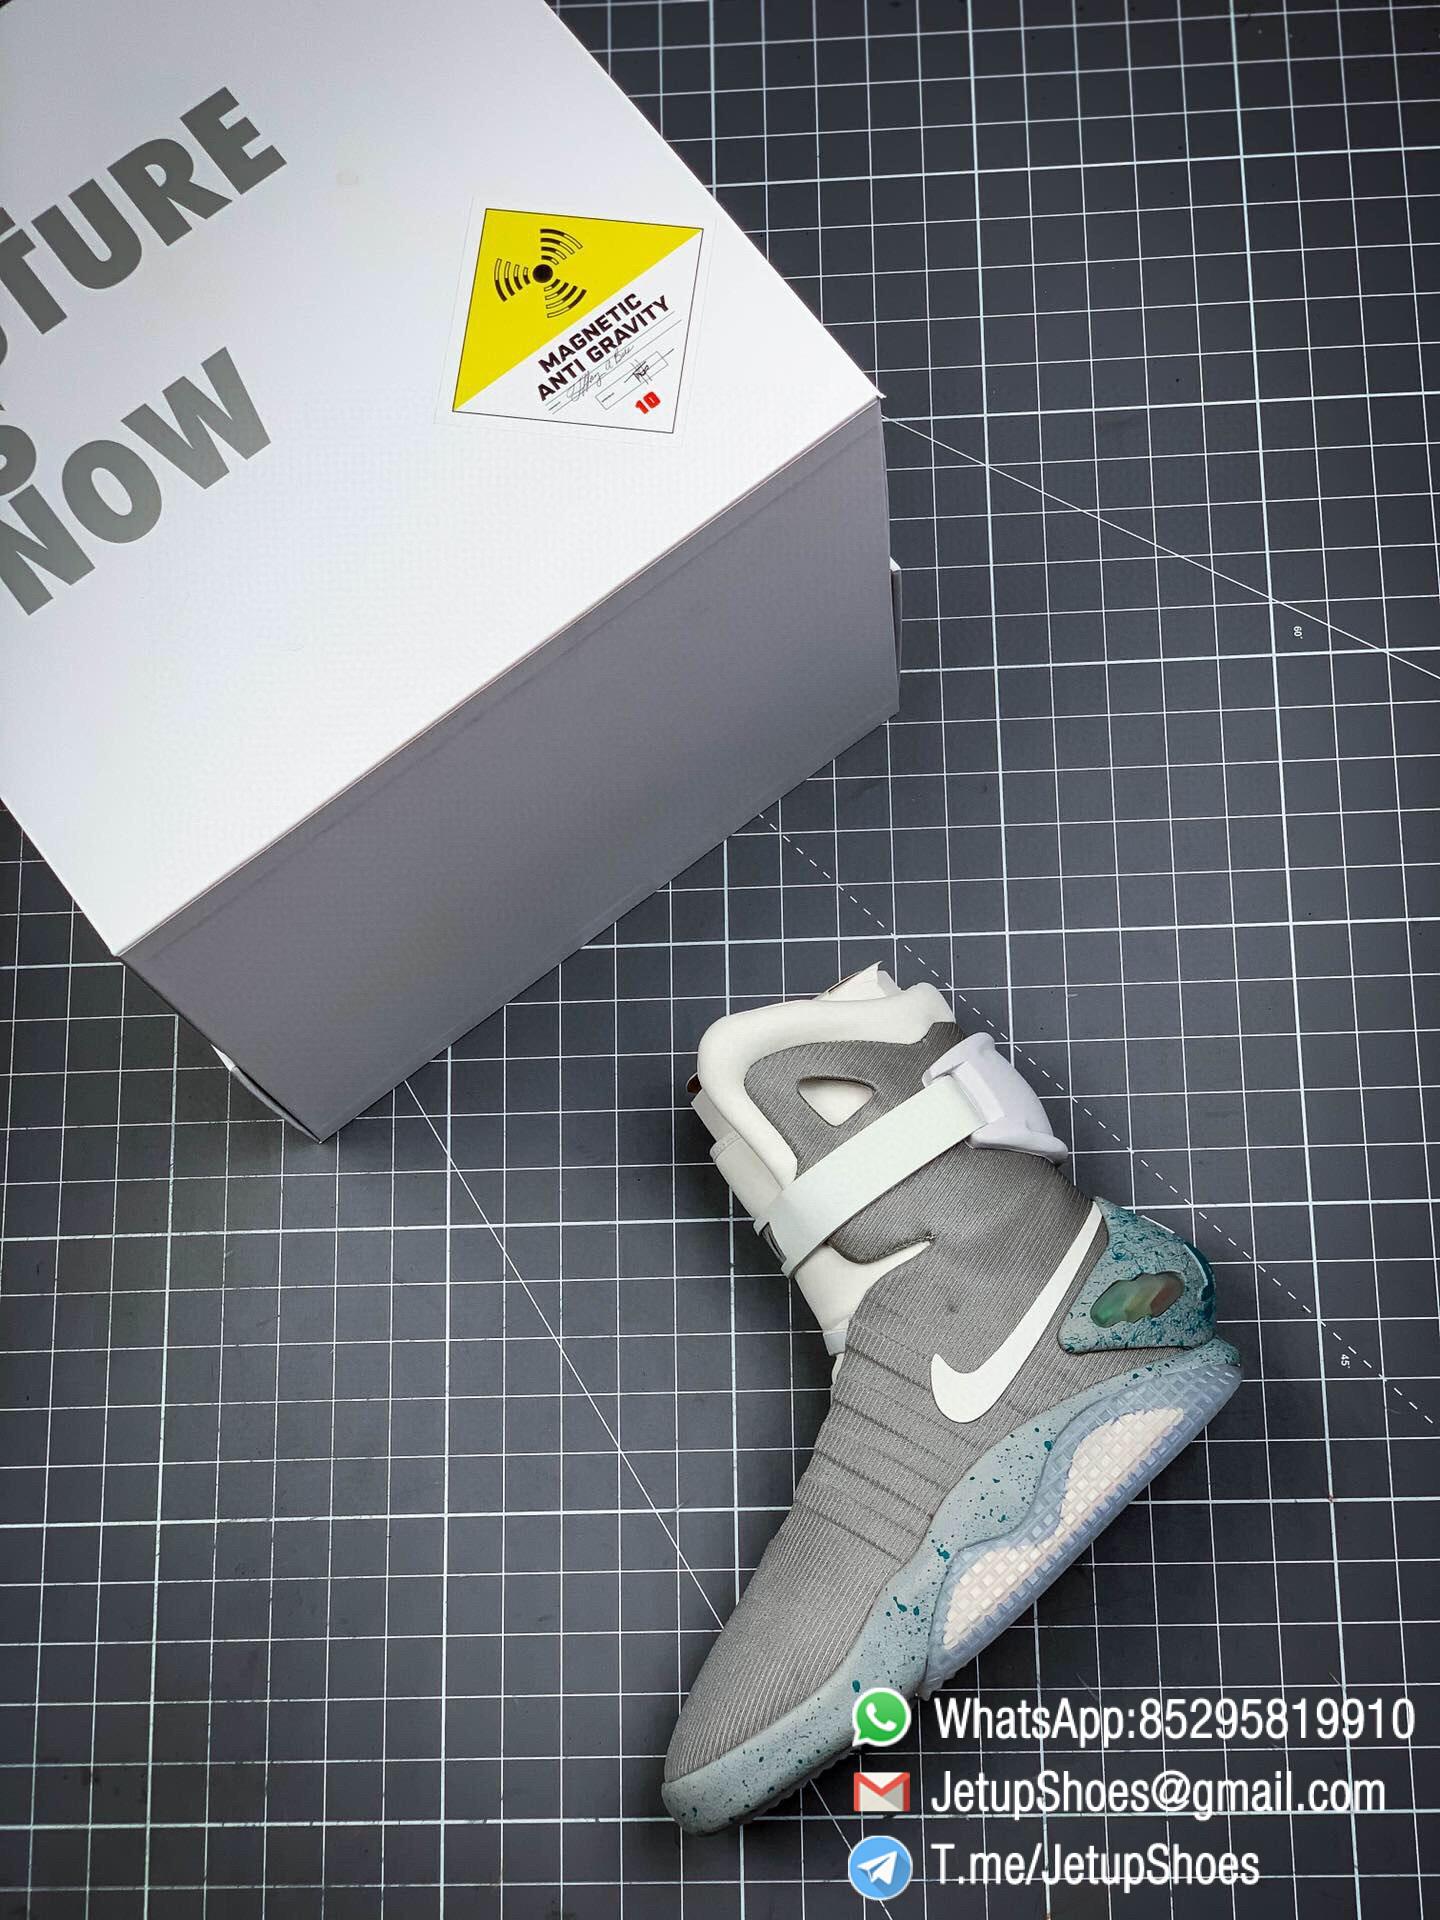 Best RepSneakers Nike Mag Back To The Future SKU 417744 001 LED Array Self Lacing 07